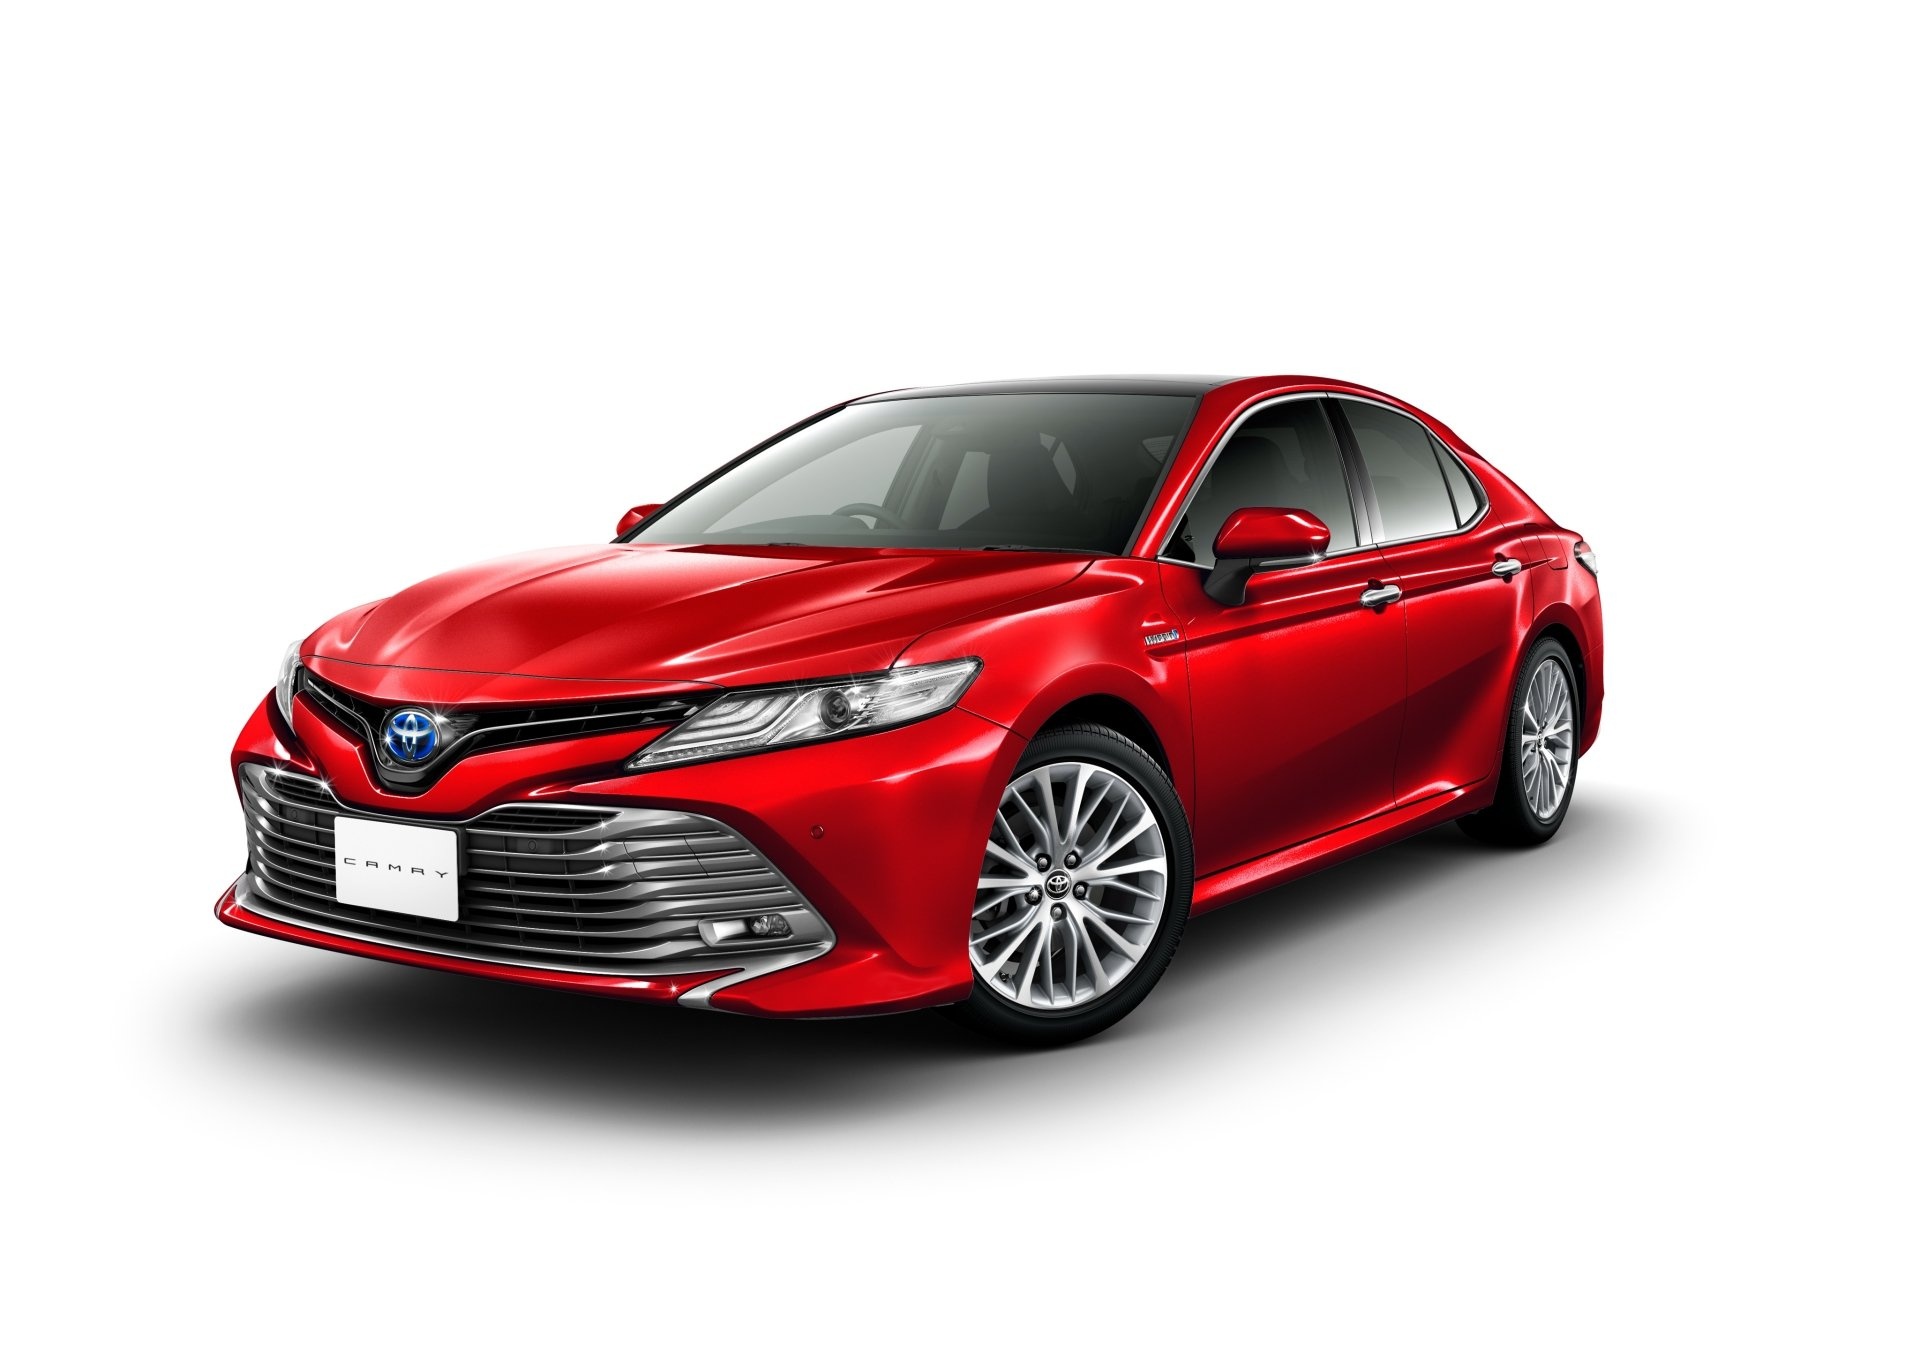 Toyota Camry, 4K wallpapers, High-resolution images, Stunning backgrounds, 1920x1360 HD Desktop